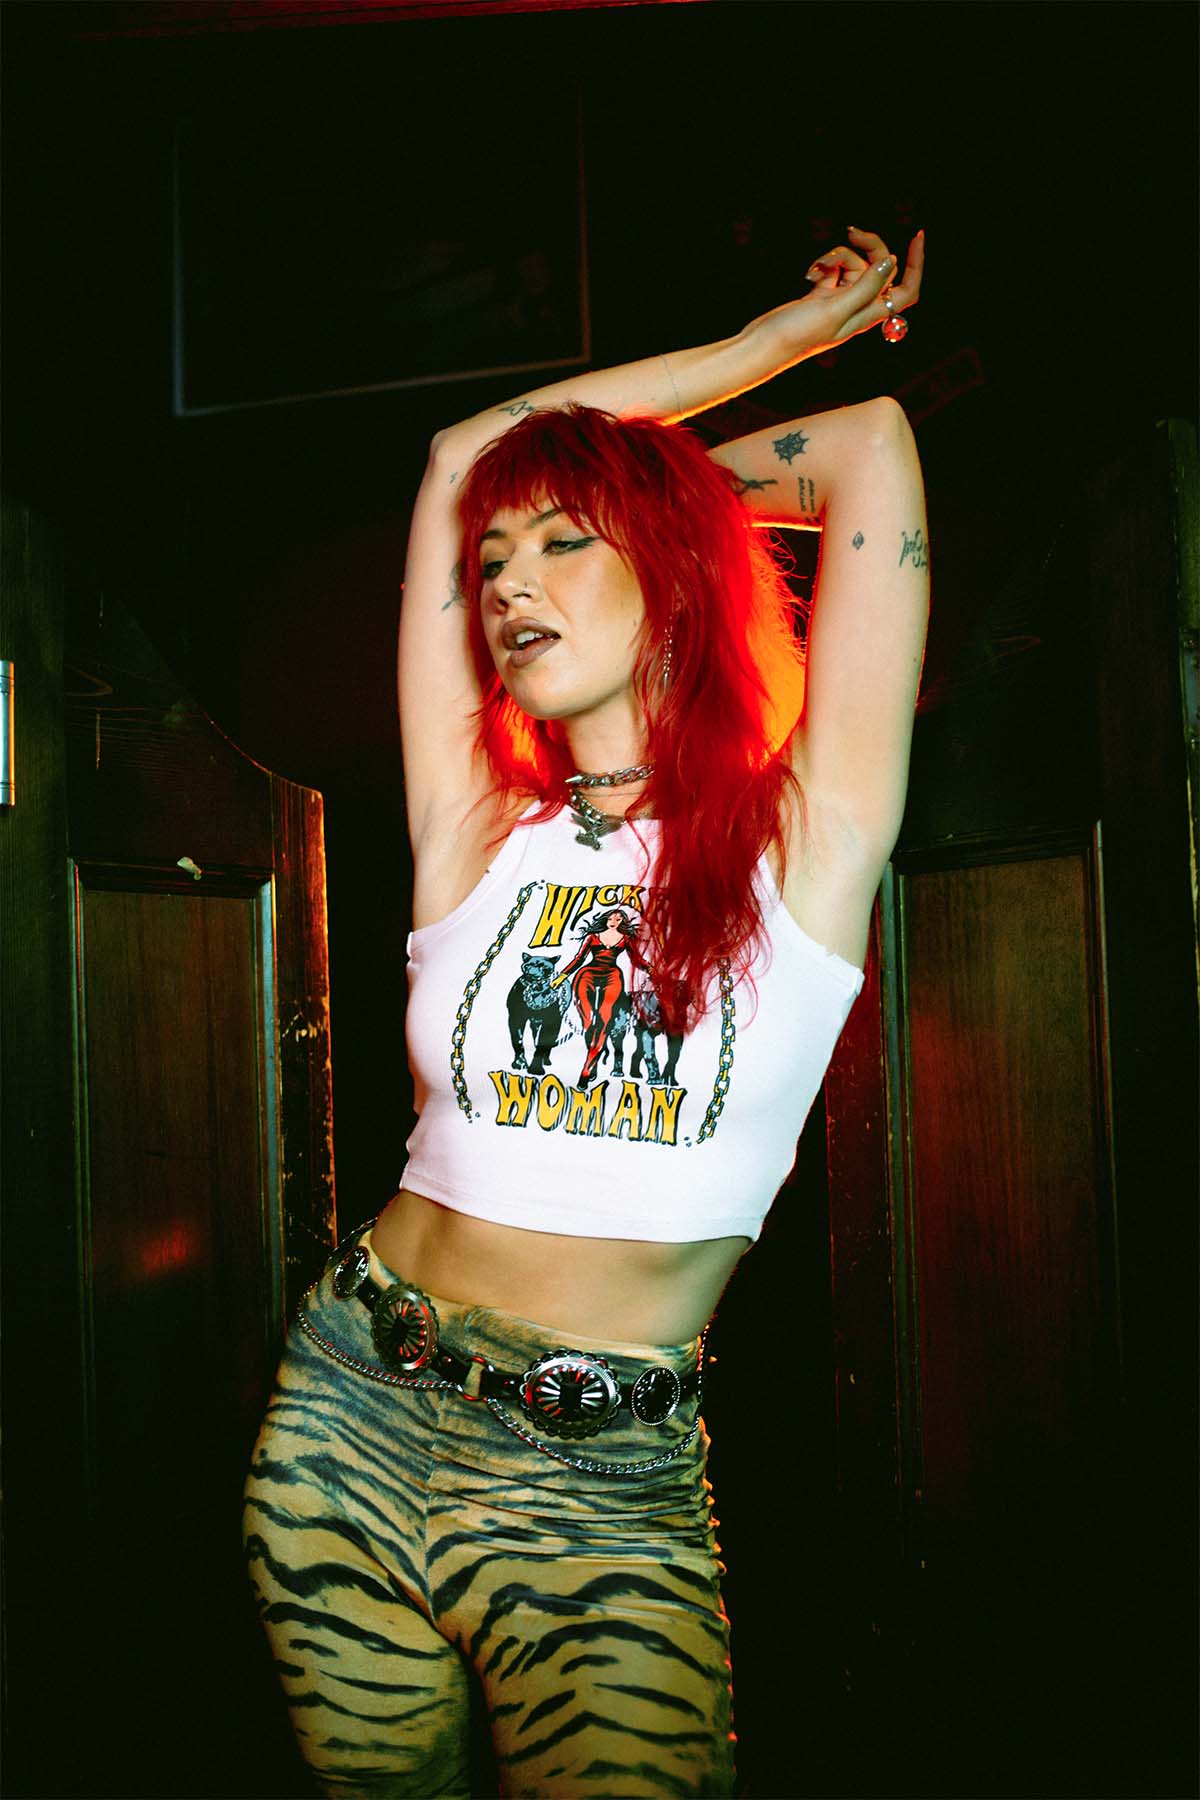 Amy Valentine wearing a Sleazy Rider Wicked Woman tank top in Slim Jim's London